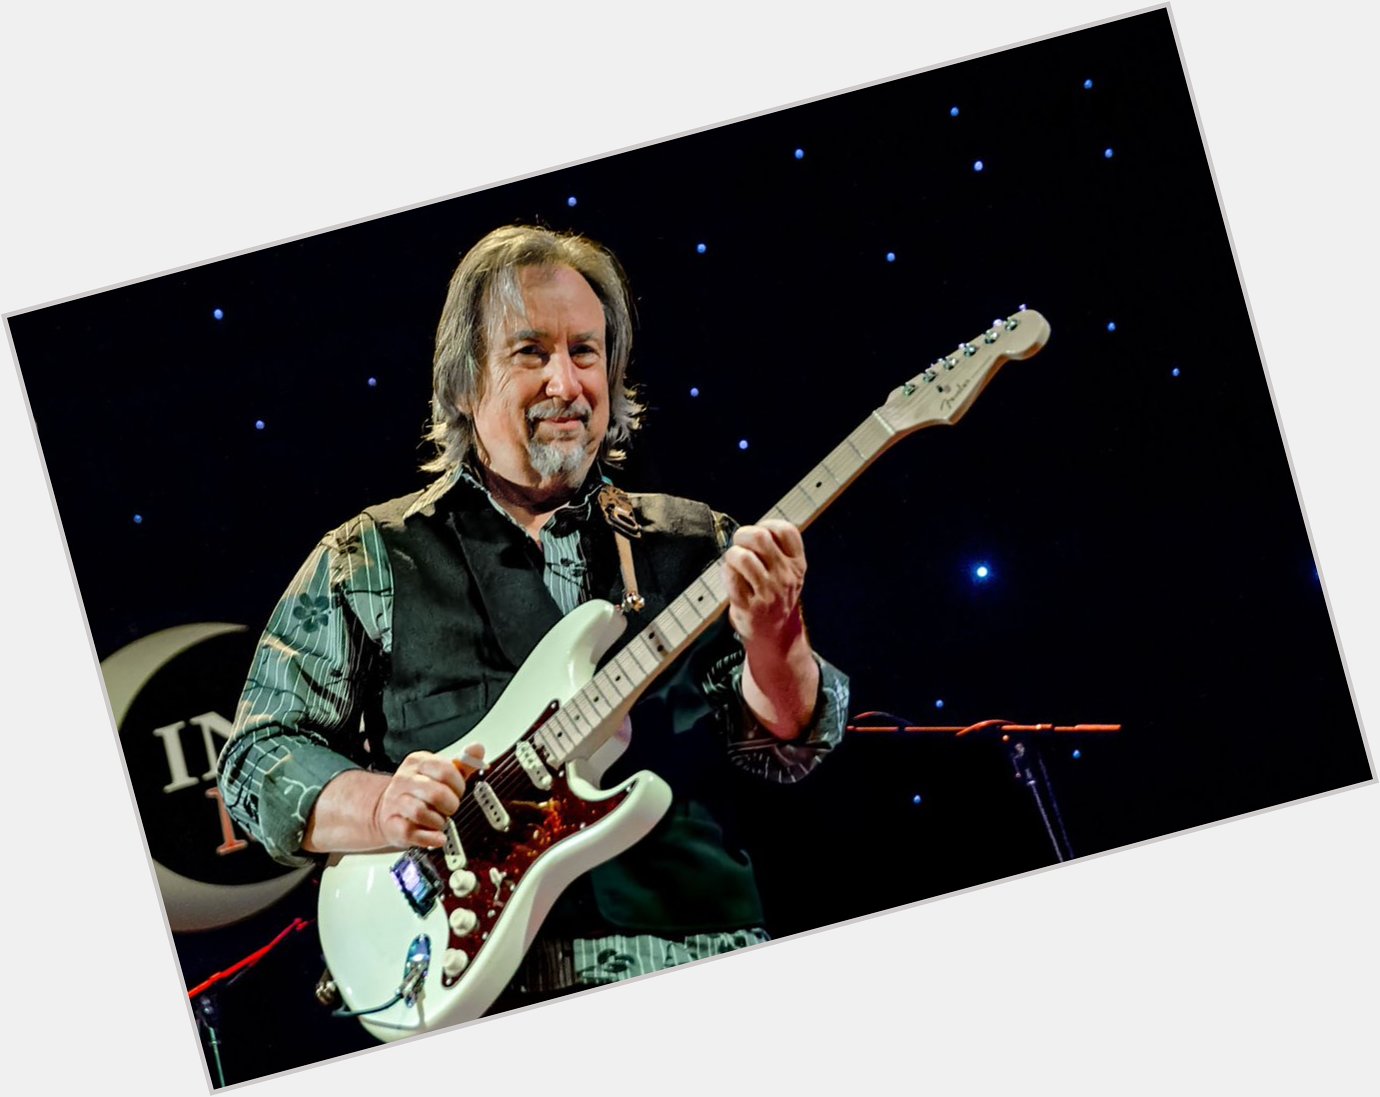 Please join us here at in wishing the one and only Jim Messina a very Happy 73rd Birthday today  